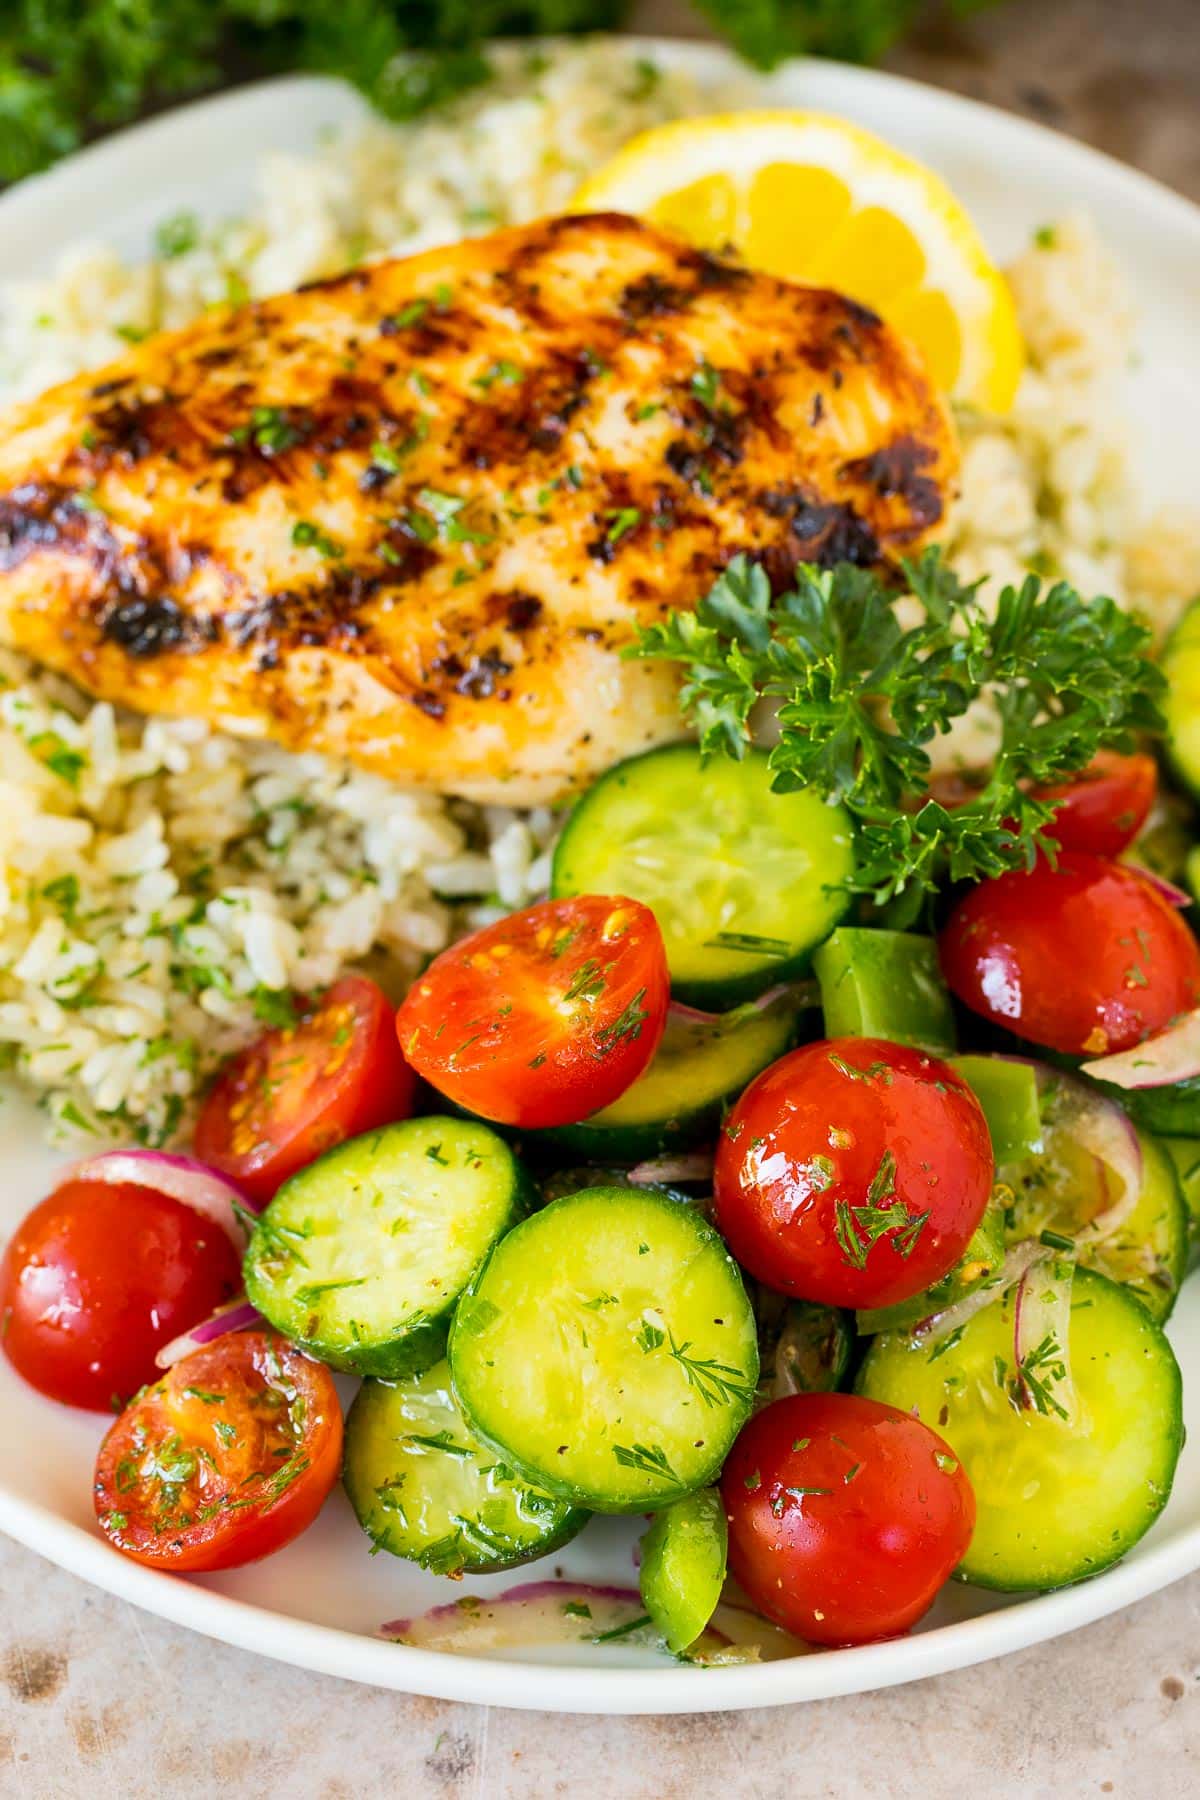 Cucumber tomato salad served with grilled chicken and rice.